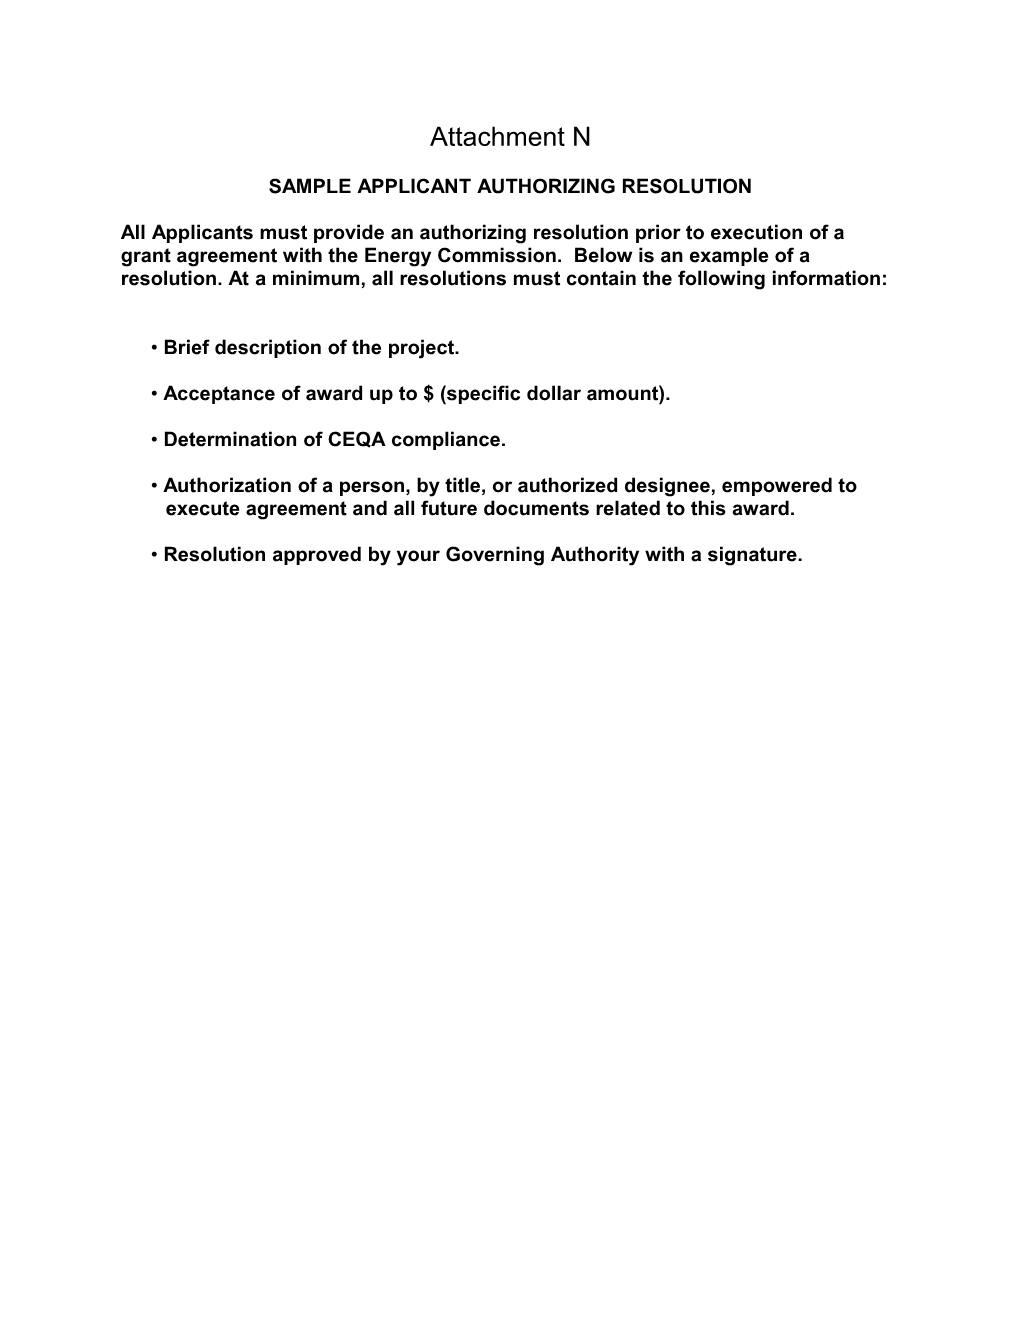 Sample Applicant Authorizing Resolution